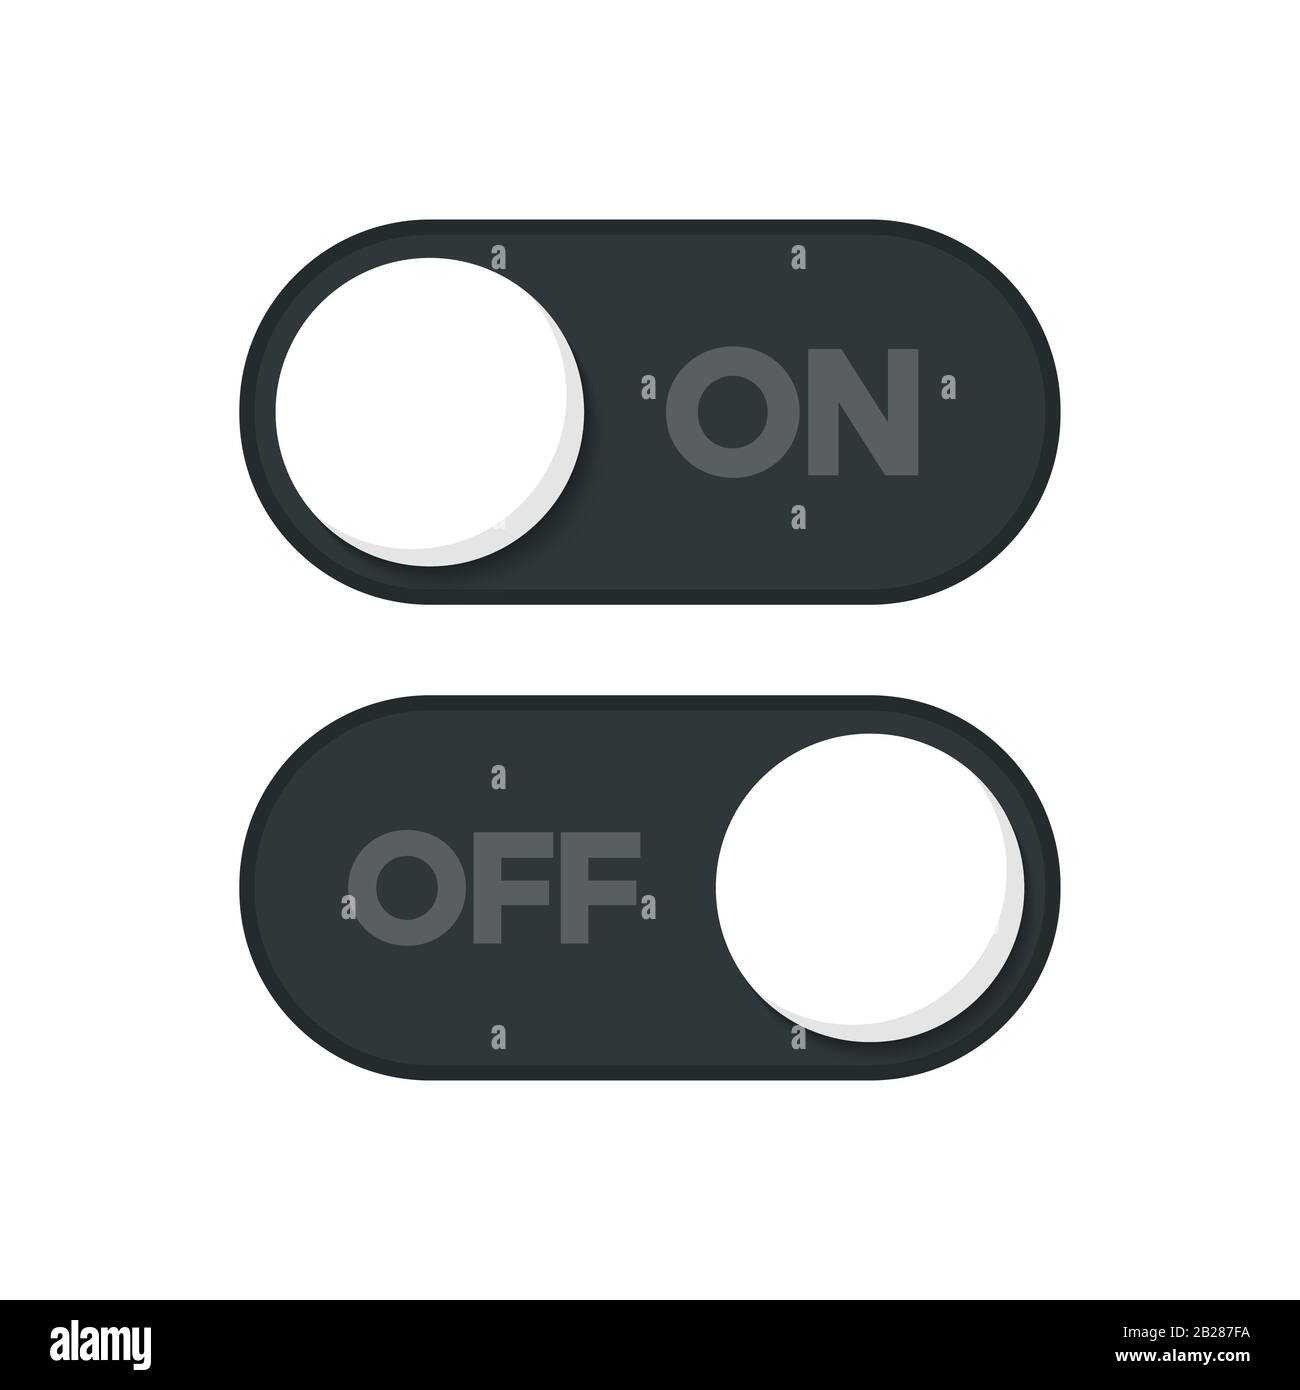 On and off icon editable. Switch button vector sign Stock Vector